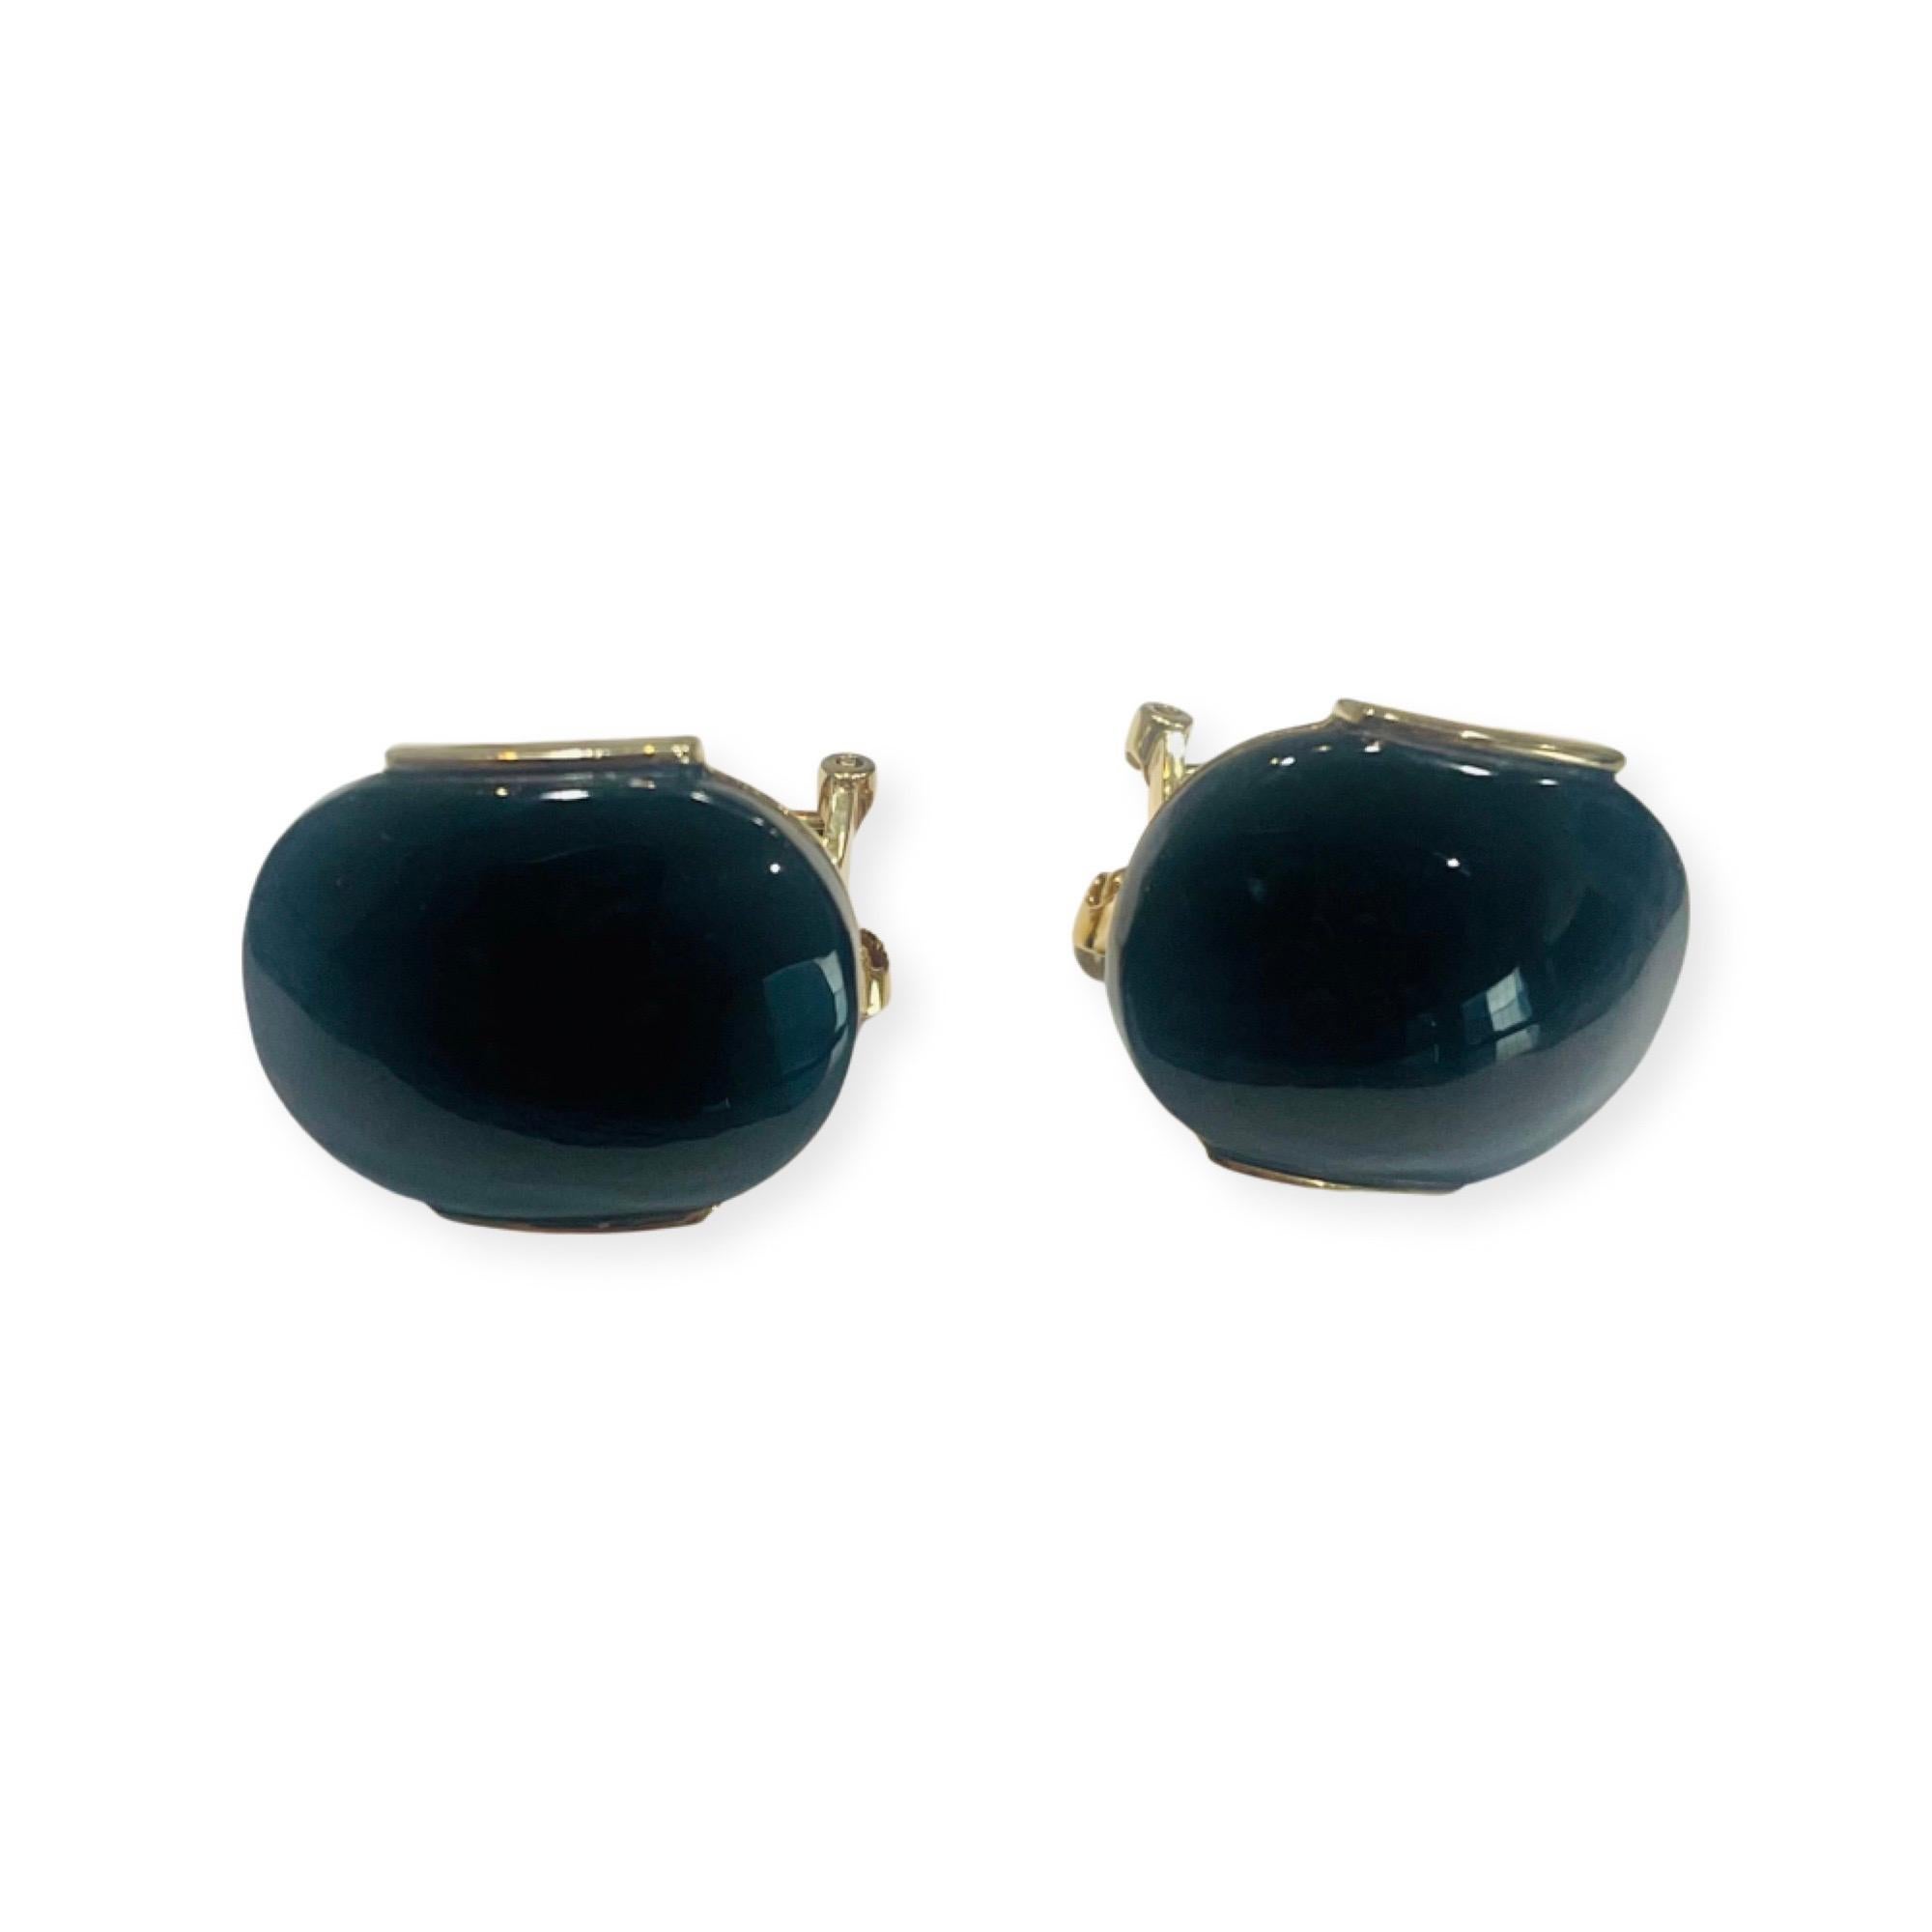 Mason Kay 18K Yellow Gold Natural Black Jade Earrings. There are 2 - 19.5 mm x 15.25 mm black jade saddles,  channel set. The earrings have omega backs. 
400-70-331